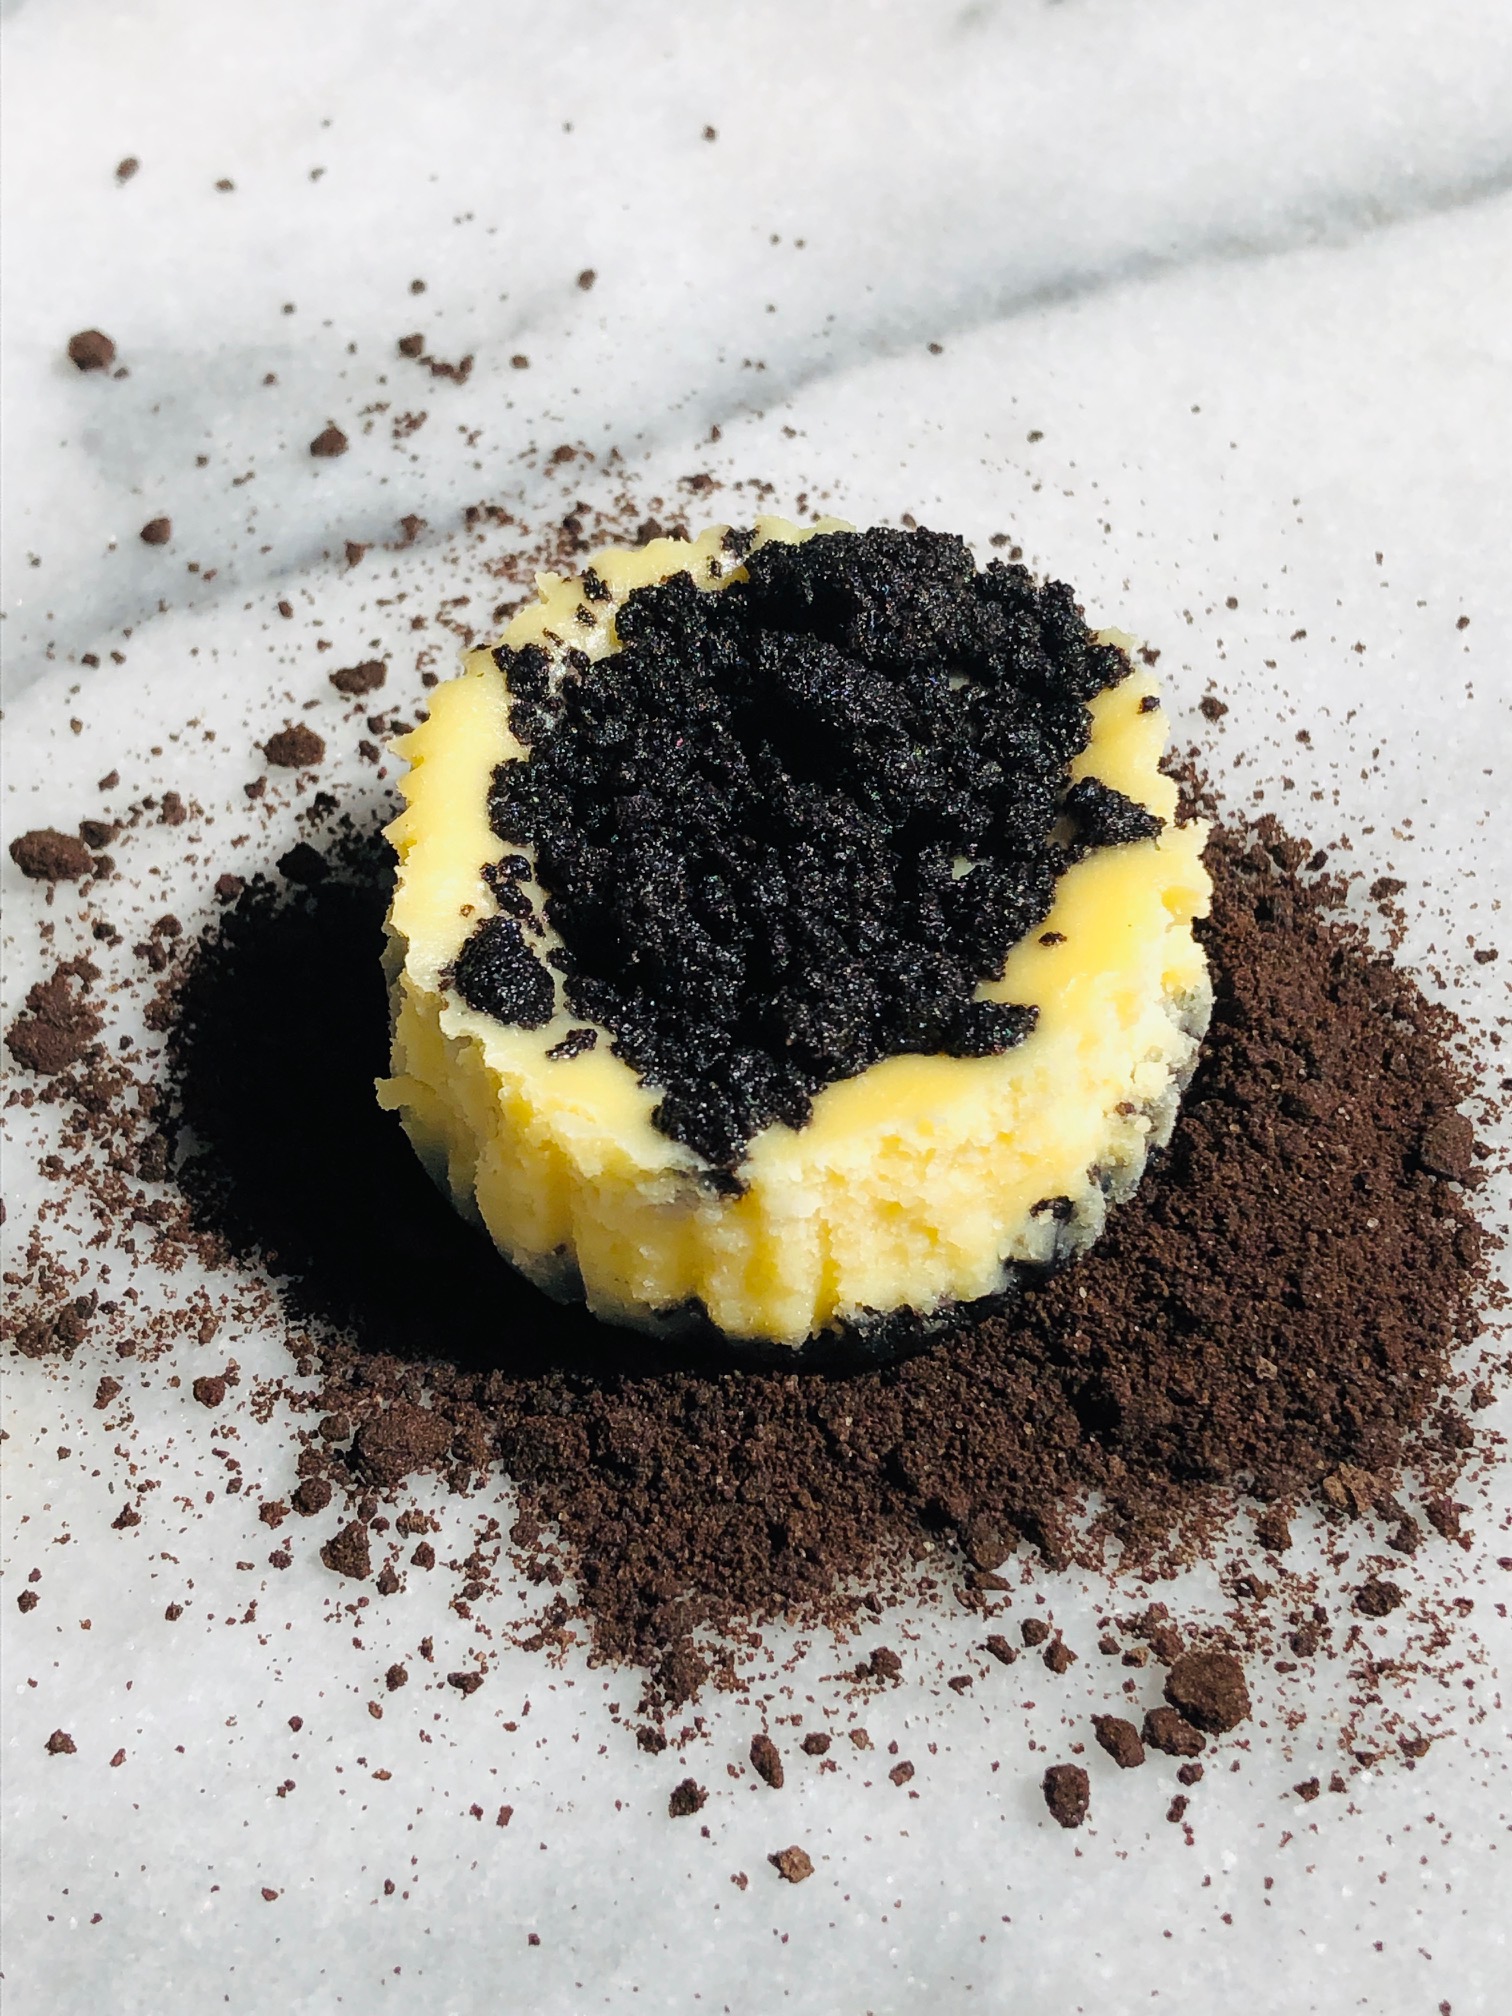 #recettegateauaufromage #recettesfamille #recettesansnoix #recettesansarachide #gateaufromage #gateaufromageoreo #oreo #oréo #dessert #recettedessert #recetteoréo #recetteoreo #recettegateaufete #recettegateauanniversaire #cheesecake